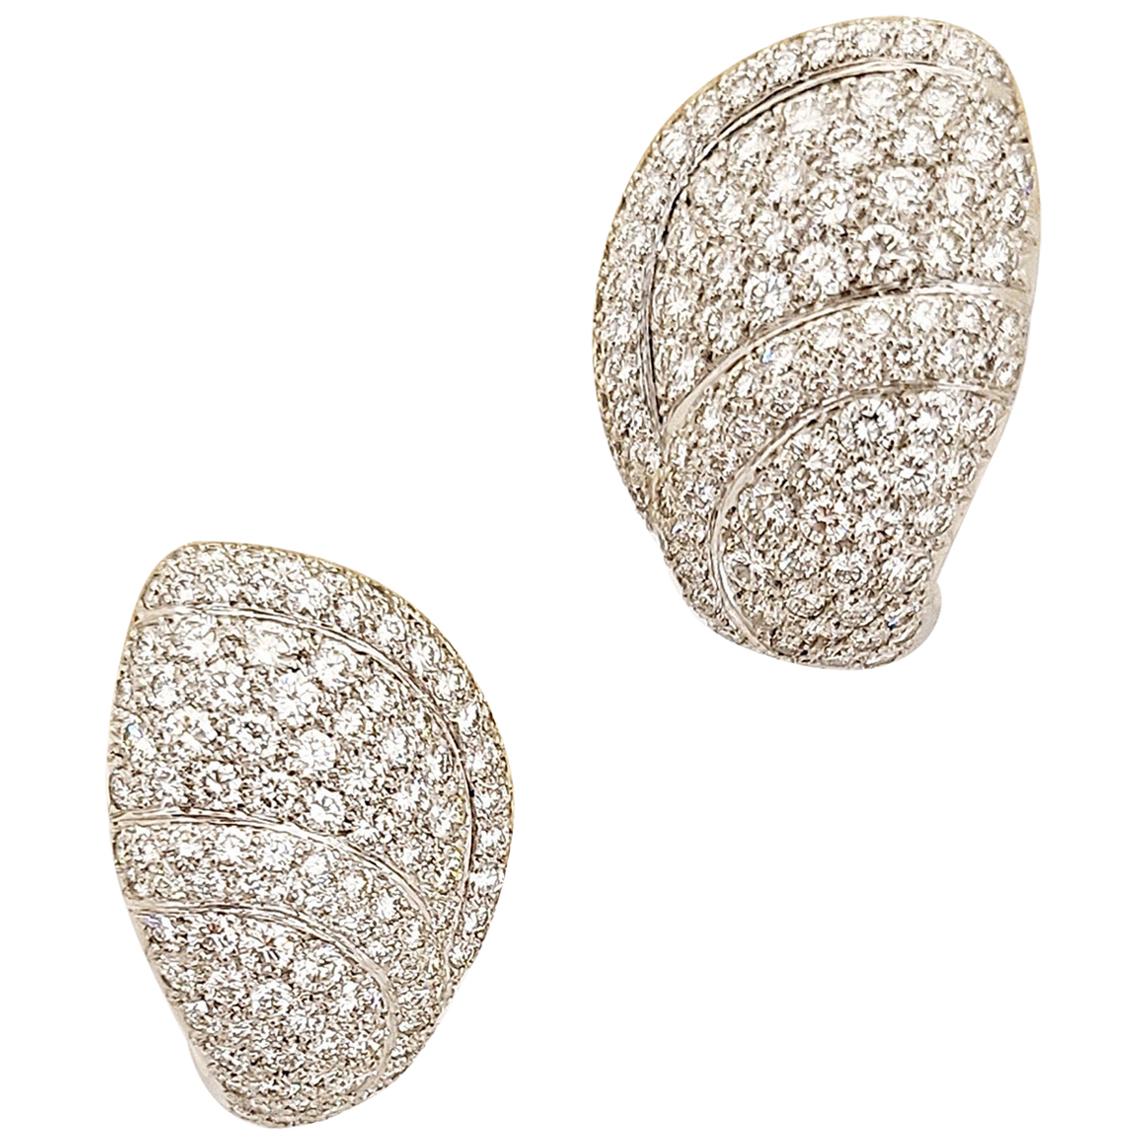 Roger Mathon for Cellini NYC 18 Karat White Gold and 5.39 Carat Diamond Earrings For Sale